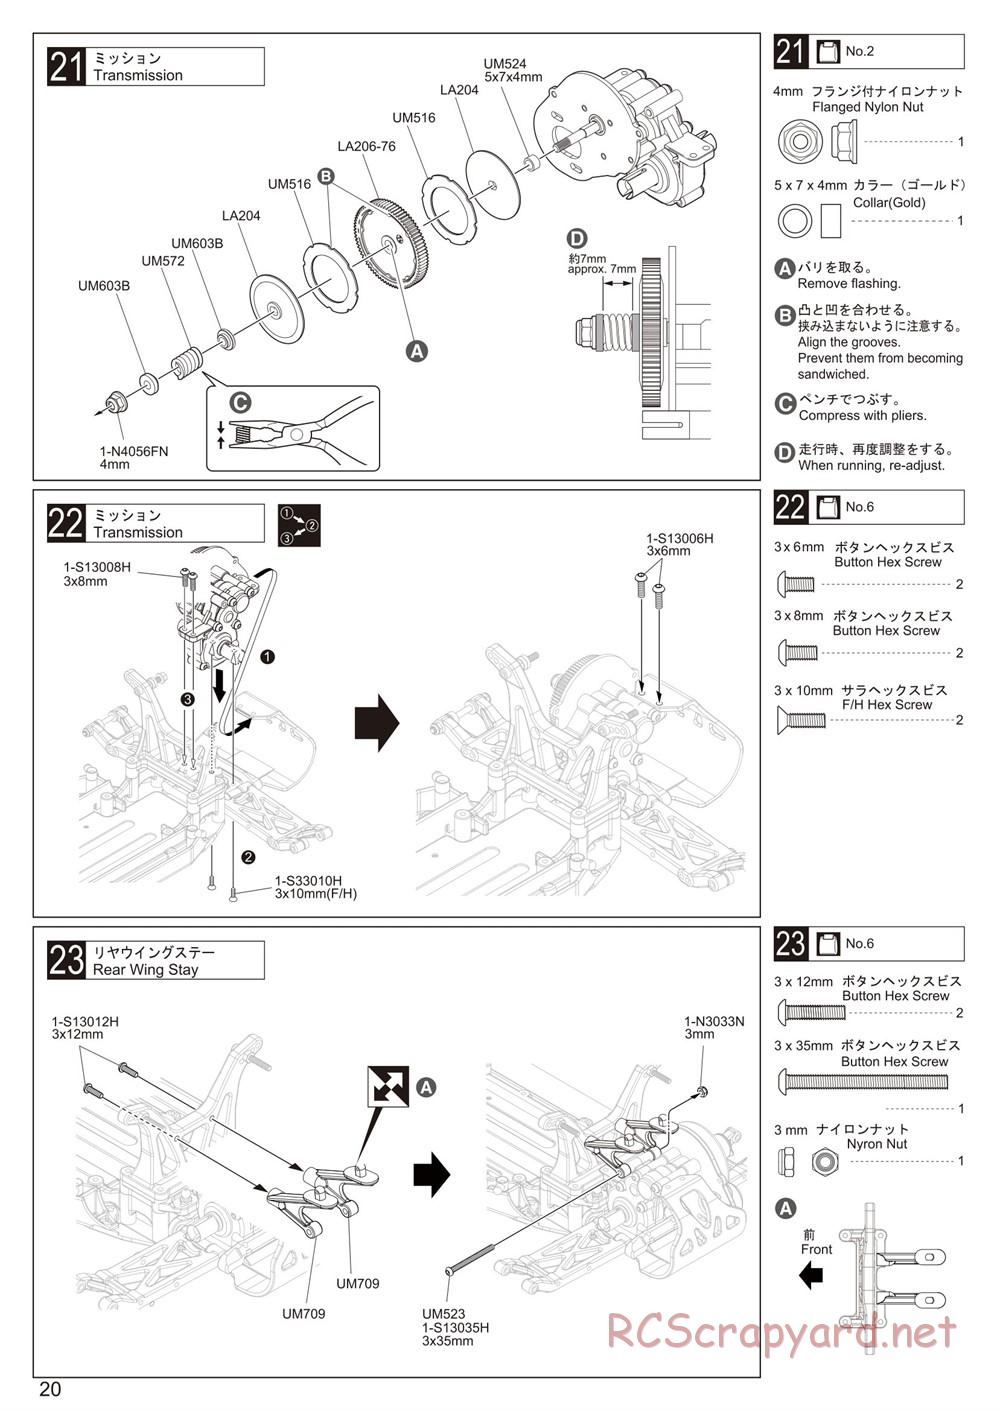 Kyosho - Ultima RB6.6 - Manual - Page 20